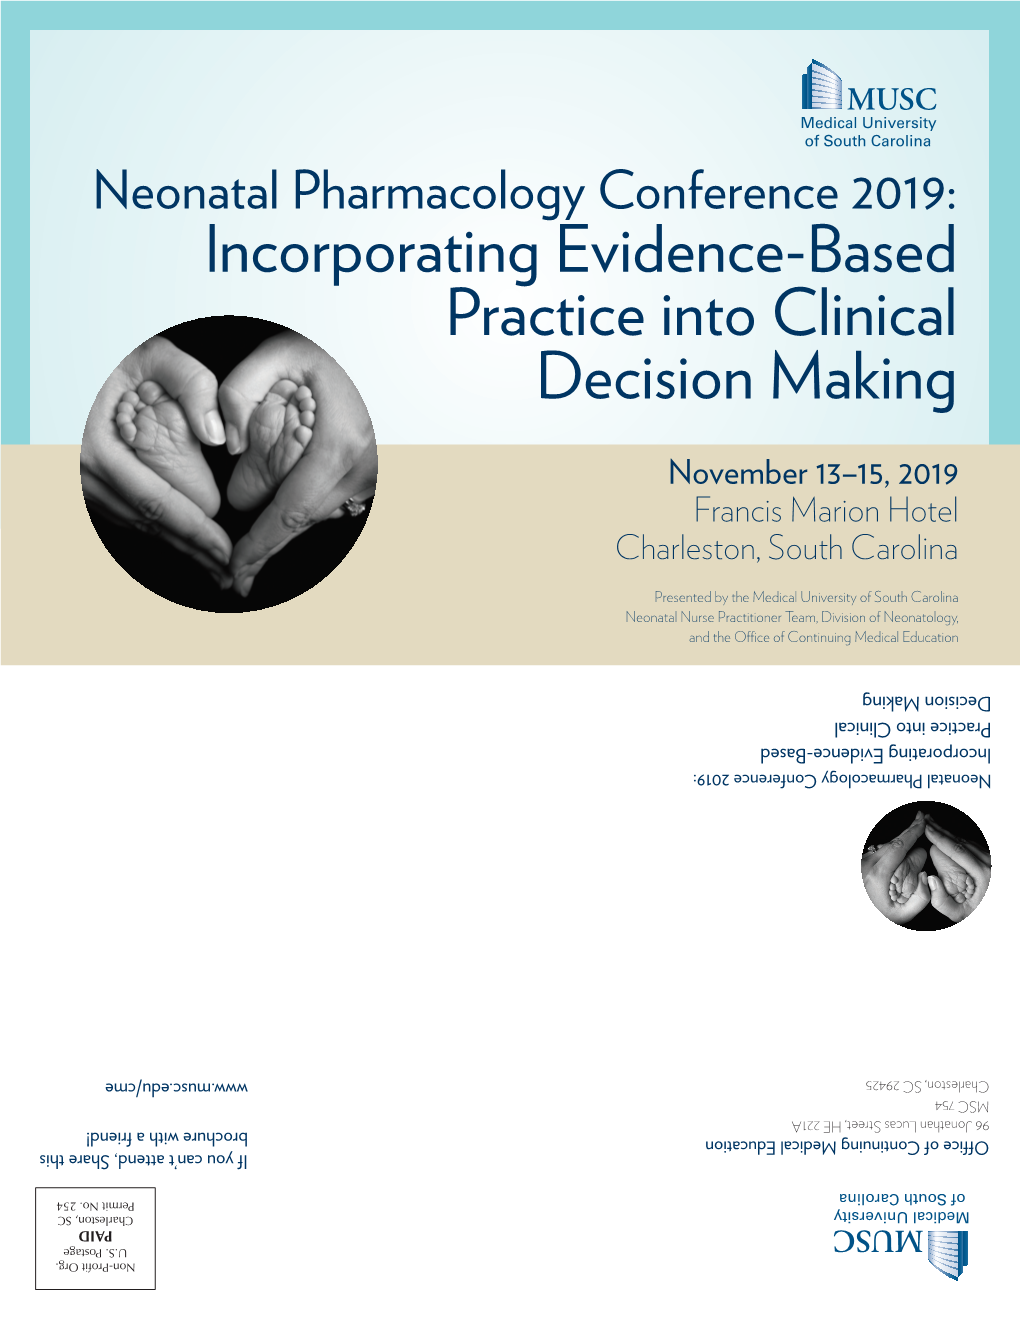 Neonatal Pharmacology Conference 2019: Incorporating Evidence-Based Practice Into Clinical Decision Making